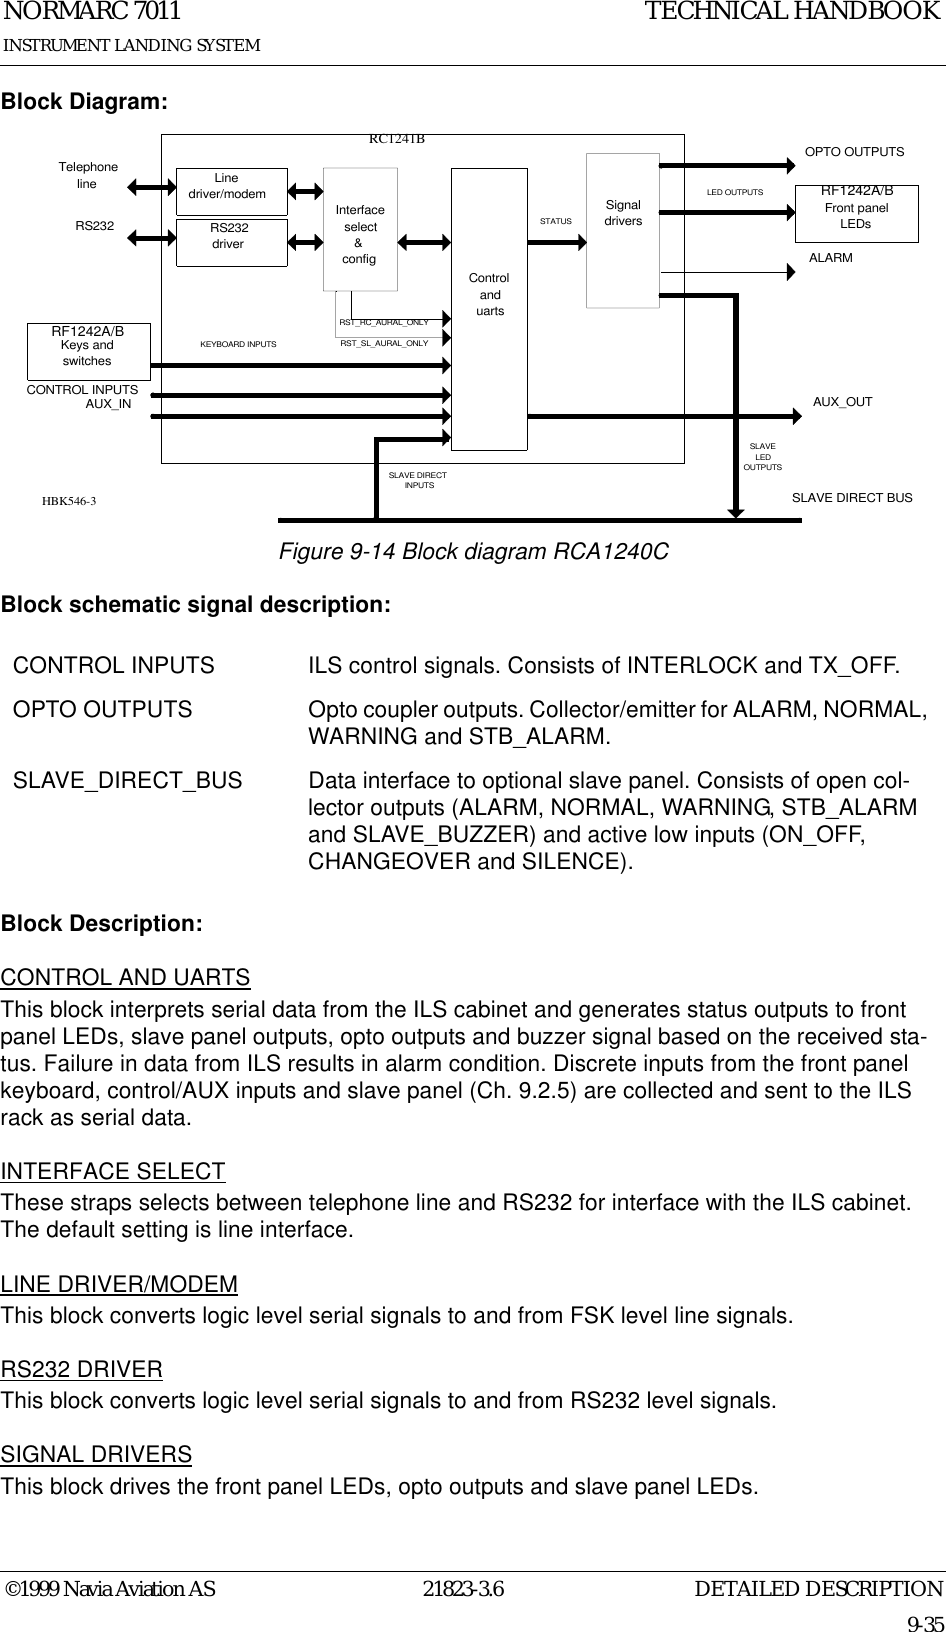 DETAILED DESCRIPTIONNORMARC 701121823-3.69-35INSTRUMENT LANDING SYSTEMTECHNICAL HANDBOOK©1999 Navia Aviation ASBlock Diagram:Figure 9-14 Block diagram RCA1240CBlock schematic signal description:Block Description:CONTROL AND UARTSThis block interprets serial data from the ILS cabinet and generates status outputs to front panel LEDs, slave panel outputs, opto outputs and buzzer signal based on the received sta-tus. Failure in data from ILS results in alarm condition. Discrete inputs from the front panel keyboard, control/AUX inputs and slave panel (Ch. 9.2.5) are collected and sent to the ILS rack as serial data. INTERFACE SELECTThese straps selects between telephone line and RS232 for interface with the ILS cabinet. The default setting is line interface.LINE DRIVER/MODEMThis block converts logic level serial signals to and from FSK level line signals.RS232 DRIVERThis block converts logic level serial signals to and from RS232 level signals.SIGNAL DRIVERSThis block drives the front panel LEDs, opto outputs and slave panel LEDs.CONTROL INPUTS ILS control signals. Consists of INTERLOCK and TX_OFF.OPTO OUTPUTS Opto coupler outputs. Collector/emitter for ALARM, NORMAL, WARNING and STB_ALARM.SLAVE_DIRECT_BUS Data interface to optional slave panel. Consists of open col-lector outputs (ALARM, NORMAL, WARNING, STB_ALARM and SLAVE_BUZZER) and active low inputs (ON_OFF, CHANGEOVER and SILENCE).Linedriver/modemTelephonelineControlanduartsLED OUTPUTSRC1241BRS232driverRS232SignaldriversSLAVE DIRECT BUSRF1242A/BFront panelLEDsAUX_IN AUX_OUTKEYBOARD INPUTSRF1242A/BKeys andswitchesCONTROL INPUTSSLAVE DIRECTINPUTSSLAVELEDOUTPUTSOPTO OUTPUTSInterfaceselect&amp;configRST_SL_AURAL_ONLYSTATUSALARMRST_RC_AURAL_ONLYHBK546-3